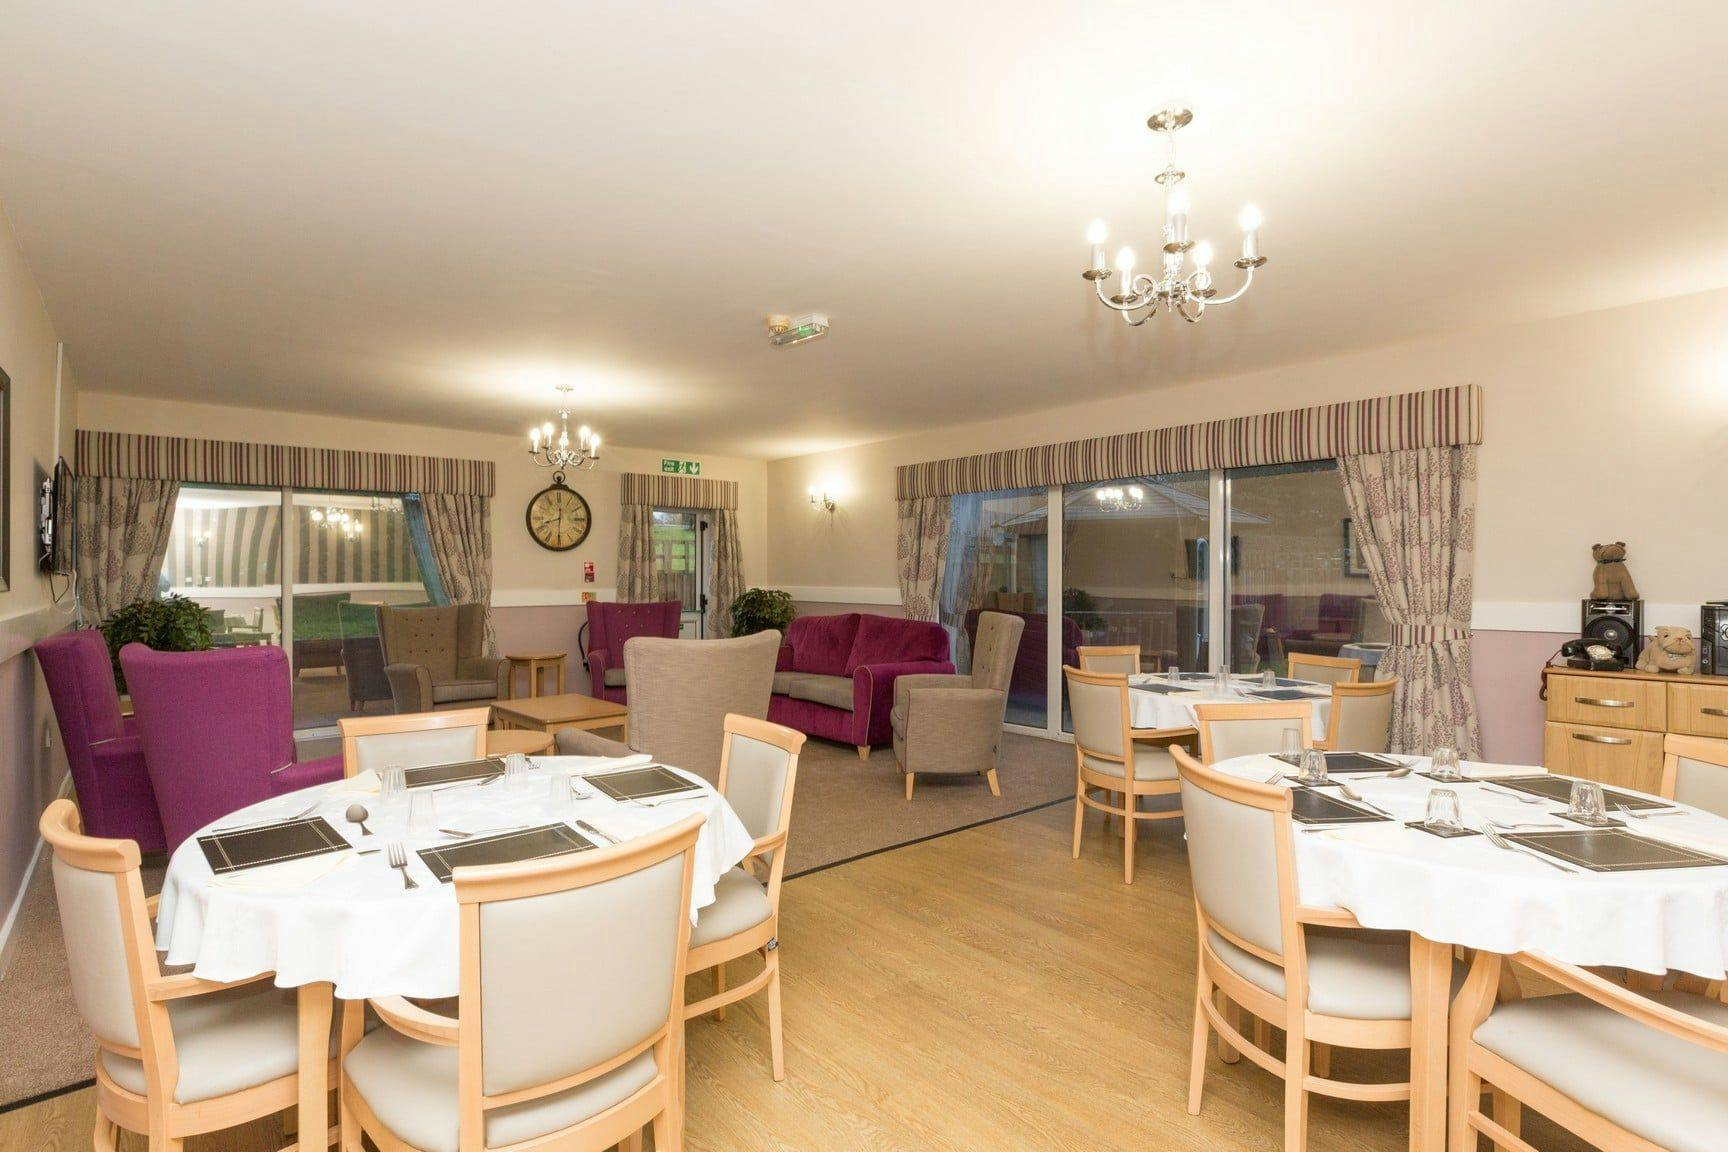 Dining Area at Hatton Court Care Home in Telford, Shropshire